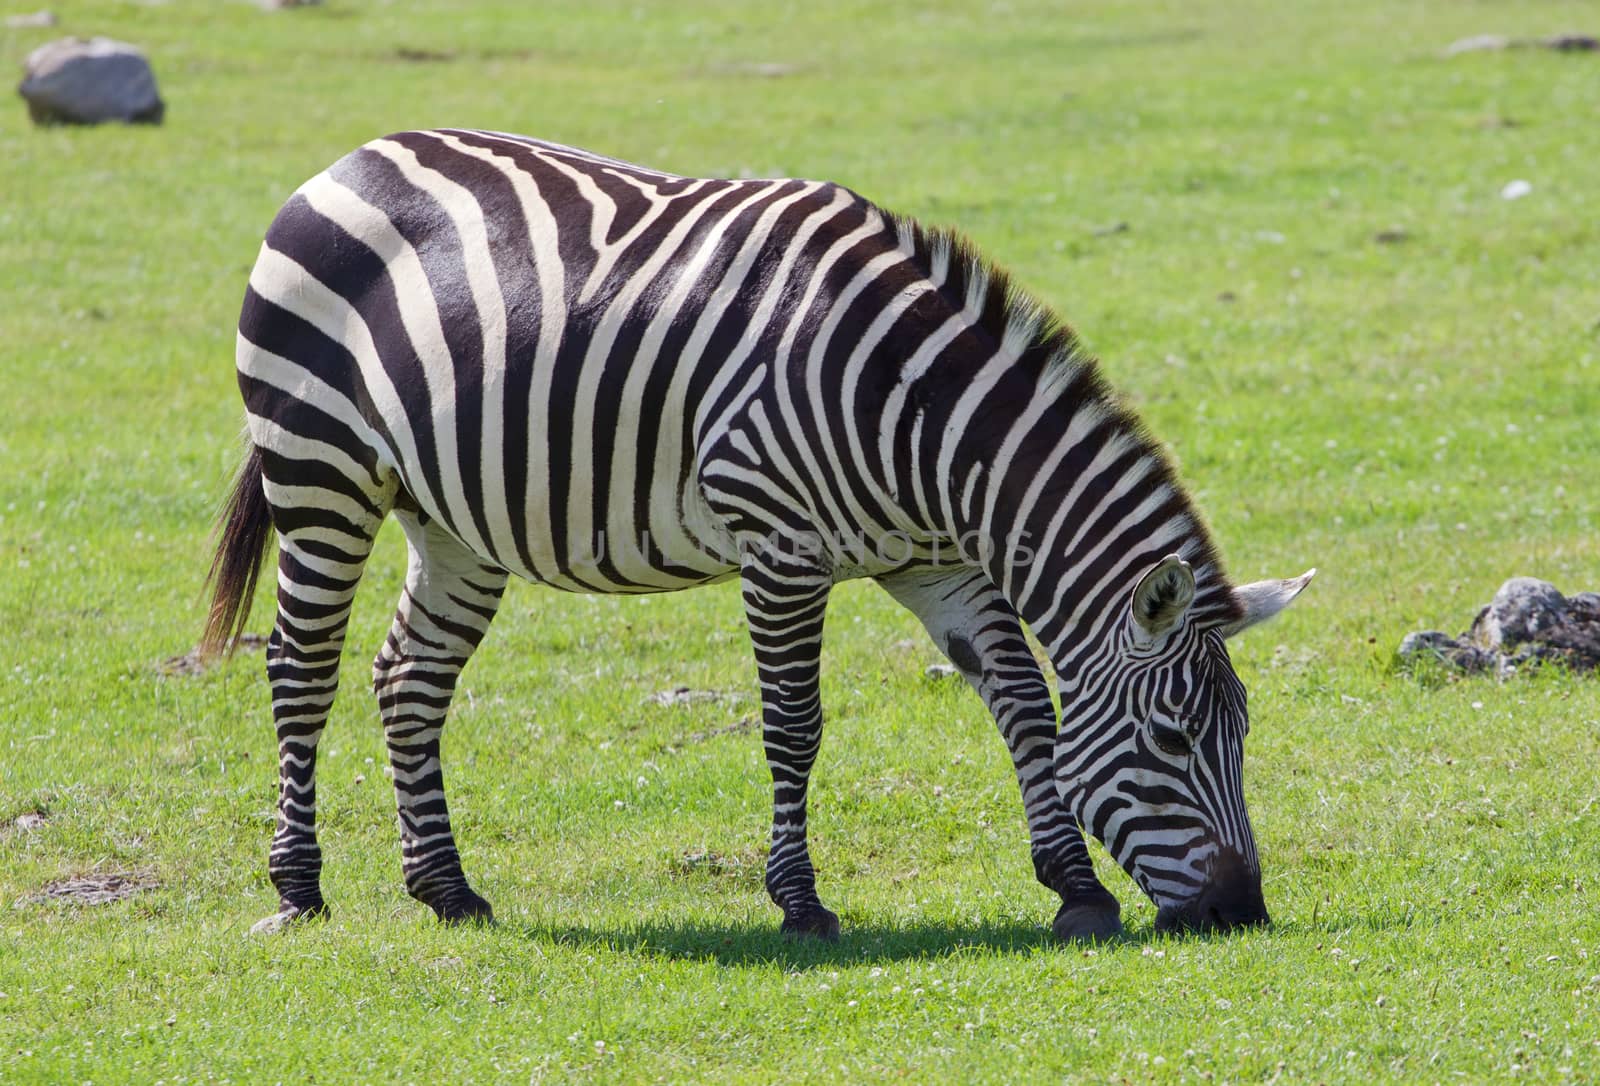 Beautiful background with the zebra on the grass field